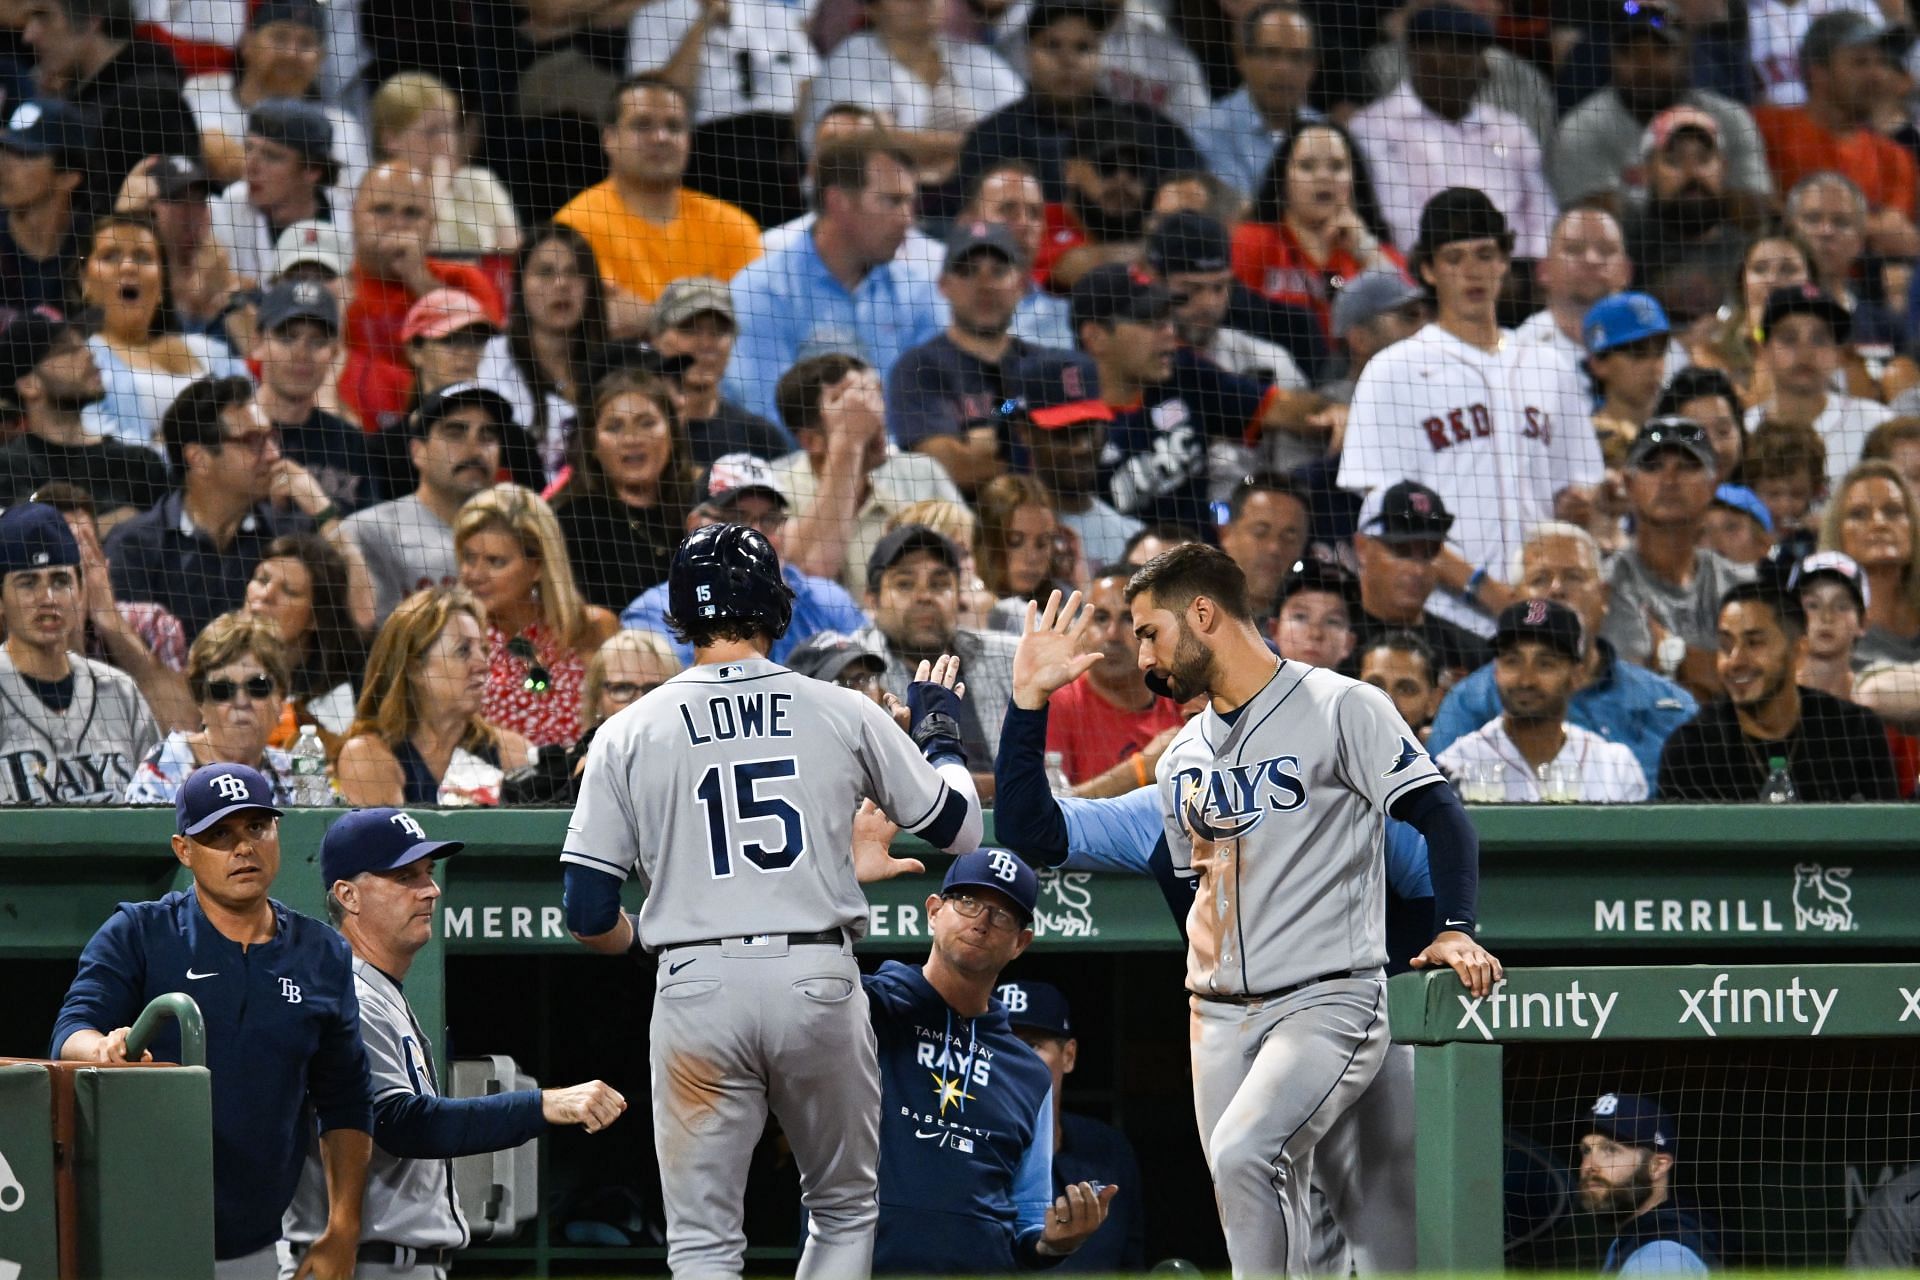 The Red Sox struggled against the Rays